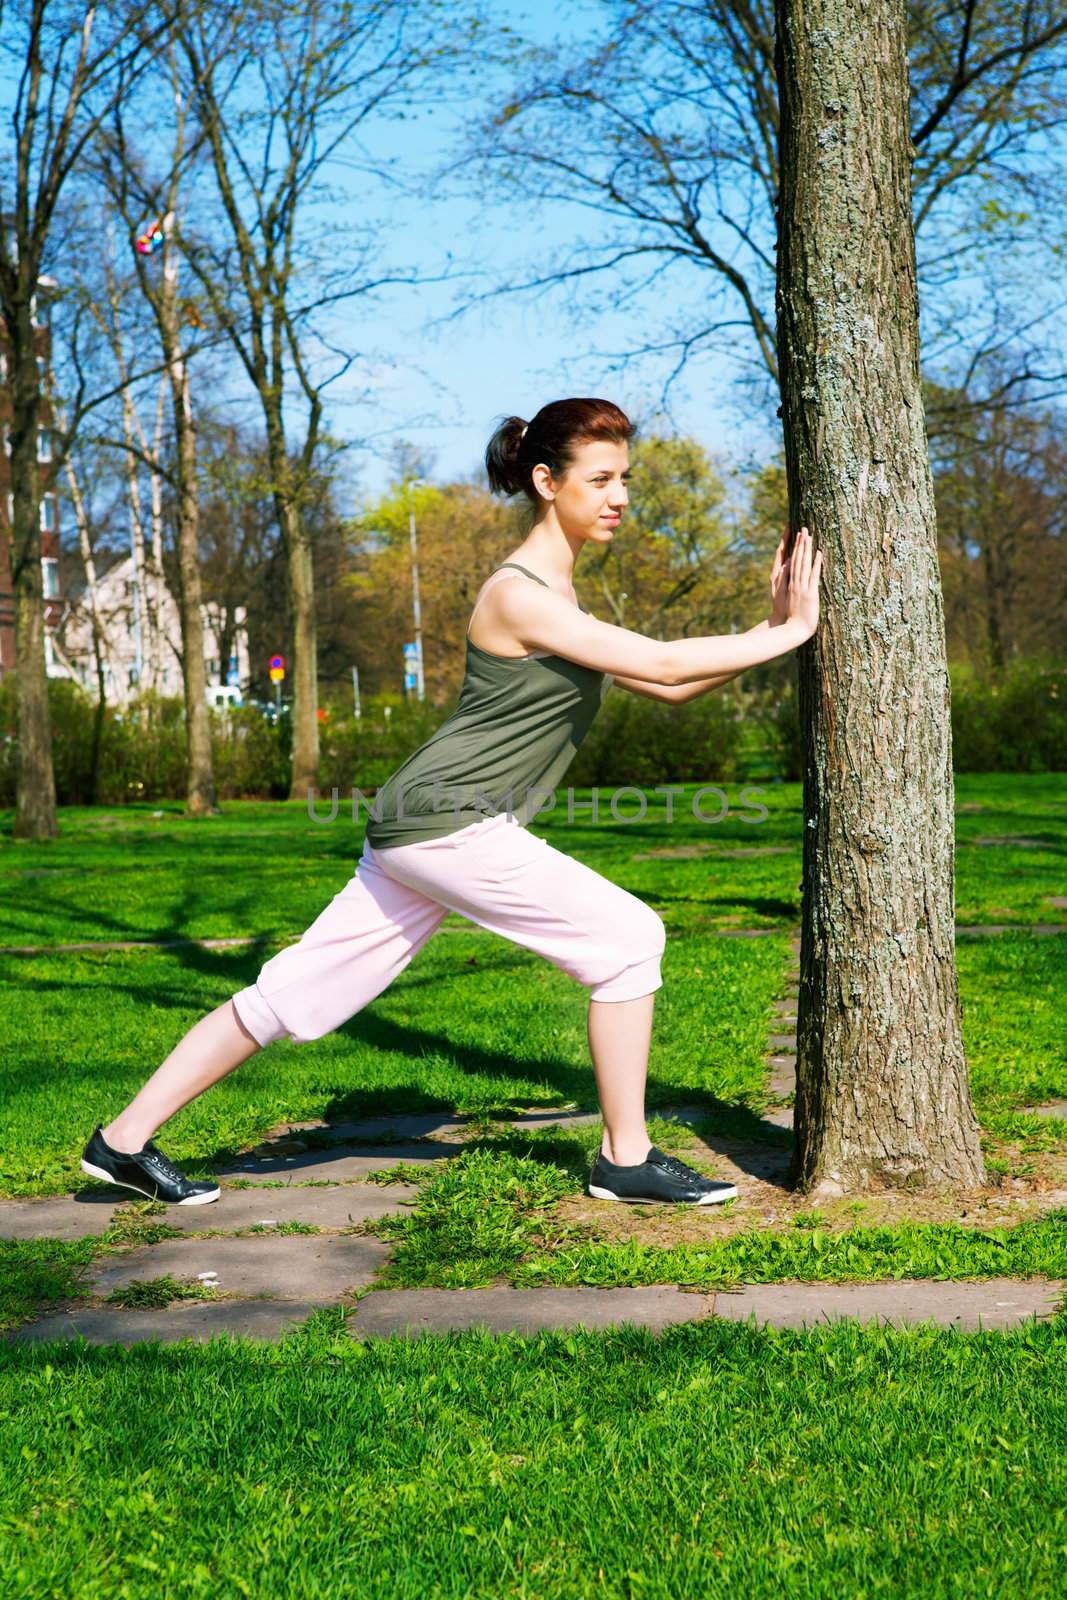 Teenage girl stretching in park in spring